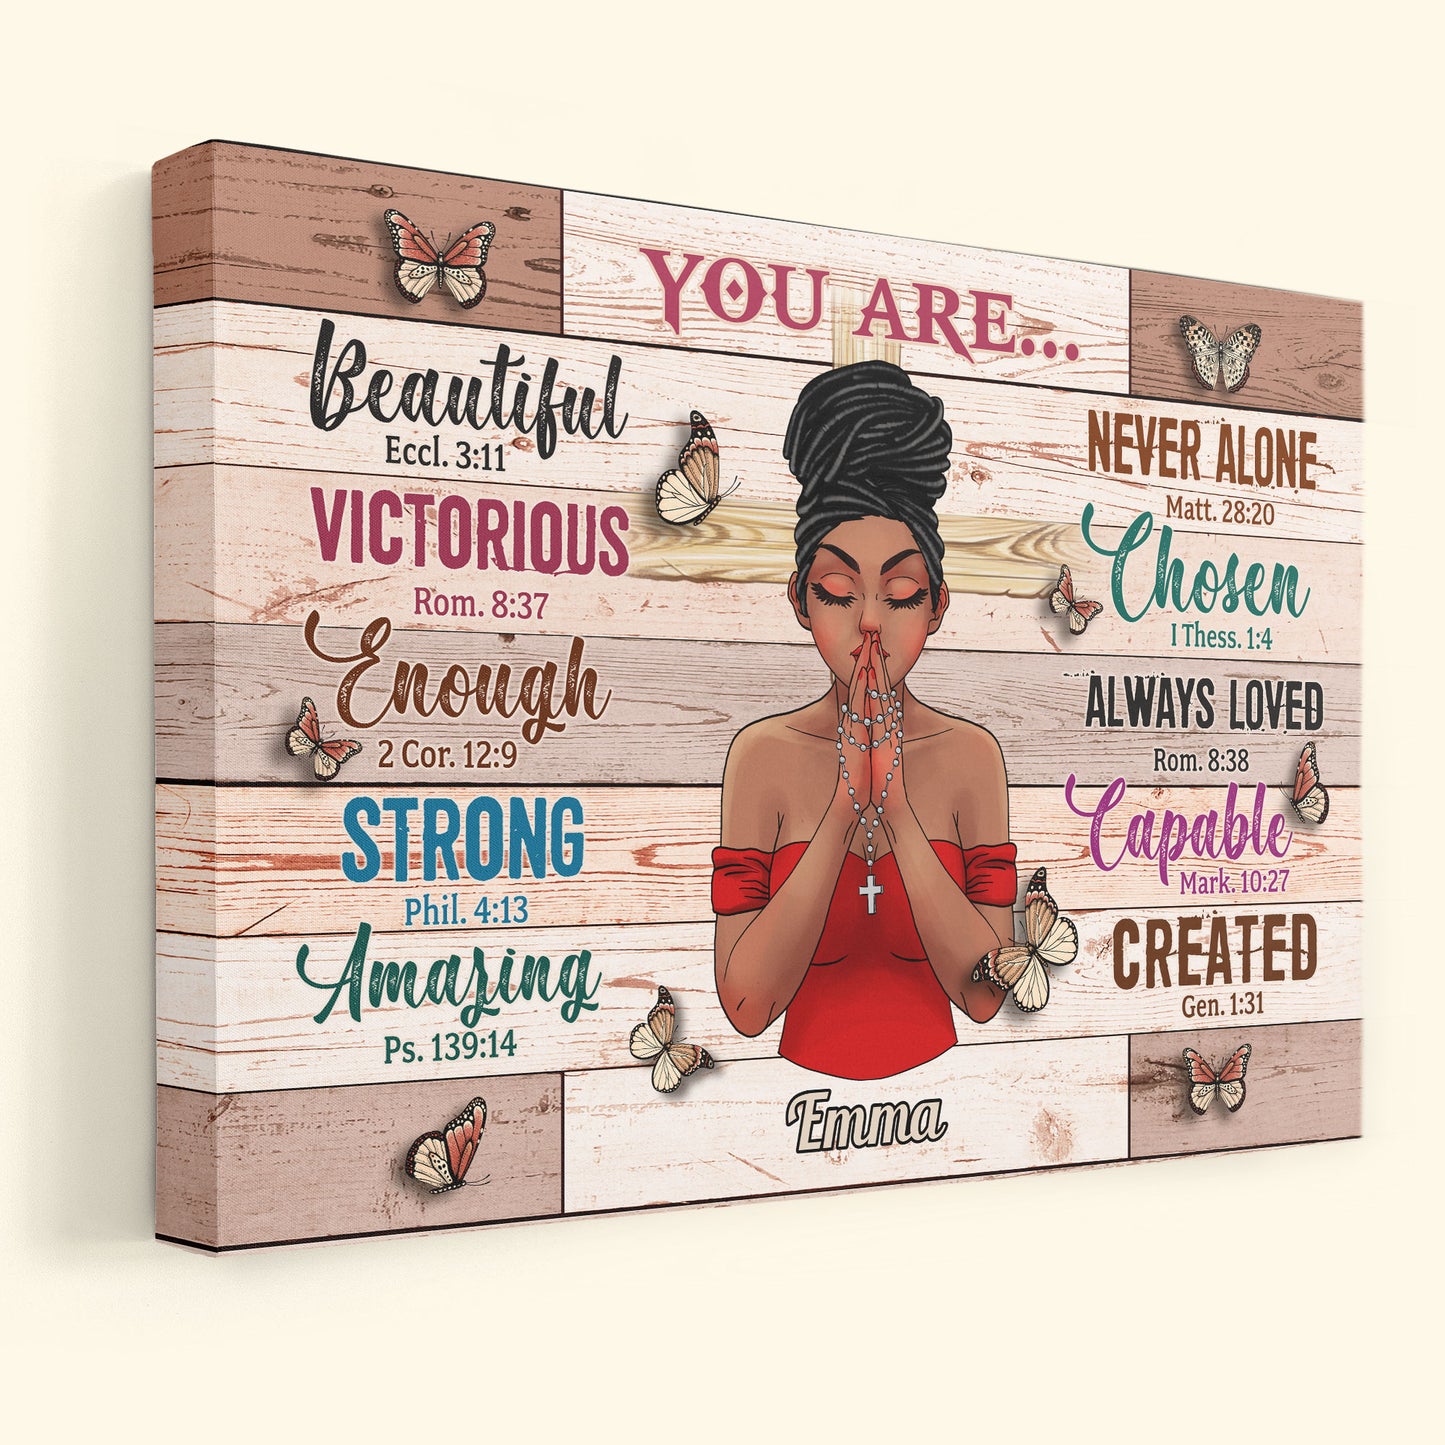 Beautiful Victorious - Personalized Poster/Wrapped Canvas